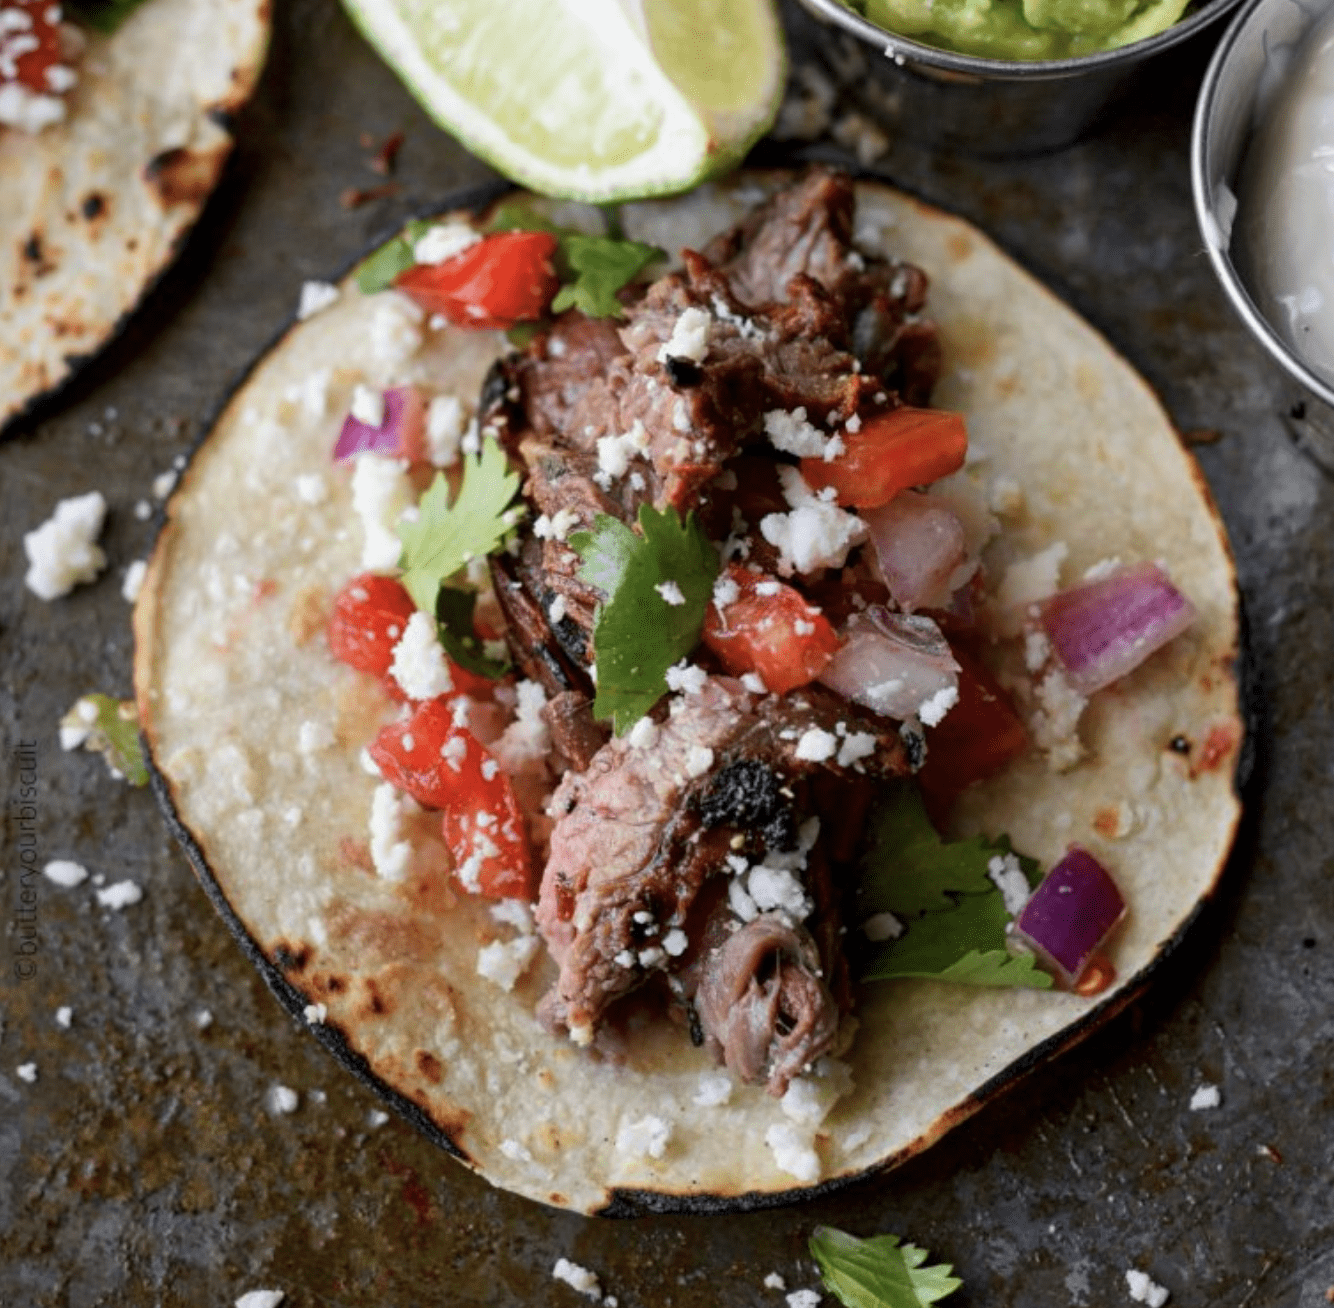 Spicy-Chipotle-Steak-Soft-Tacos